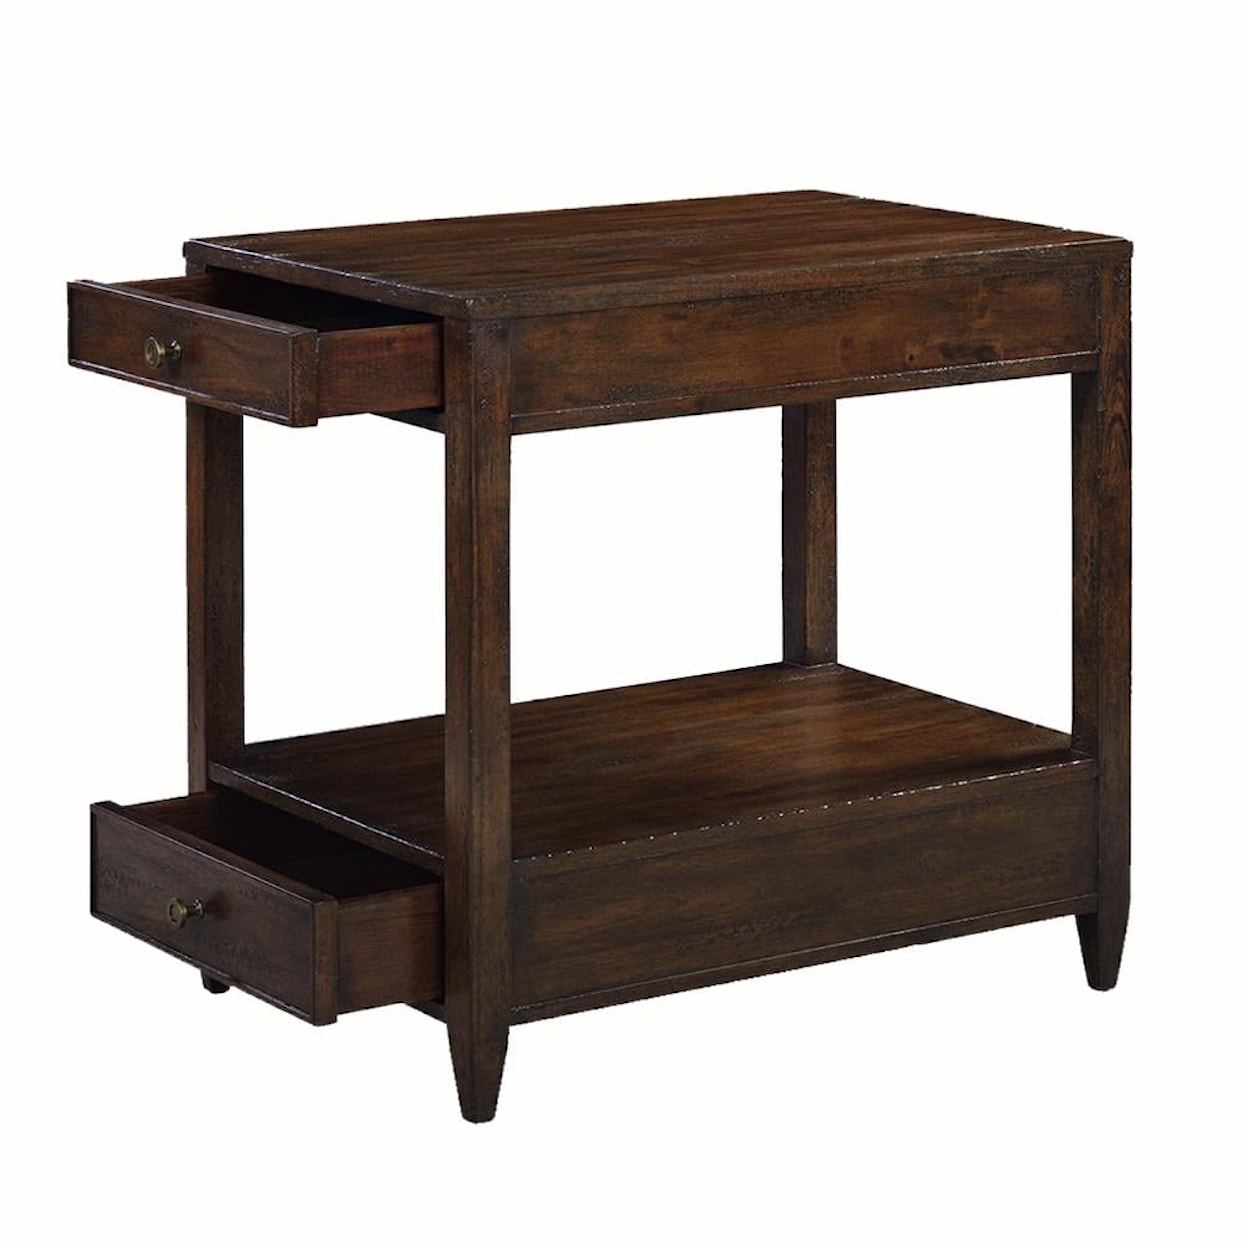 Oliver Home Furnishings End/ Side Tables NARROW, 2 DRAWER SIDE TABLE- COUNTRY